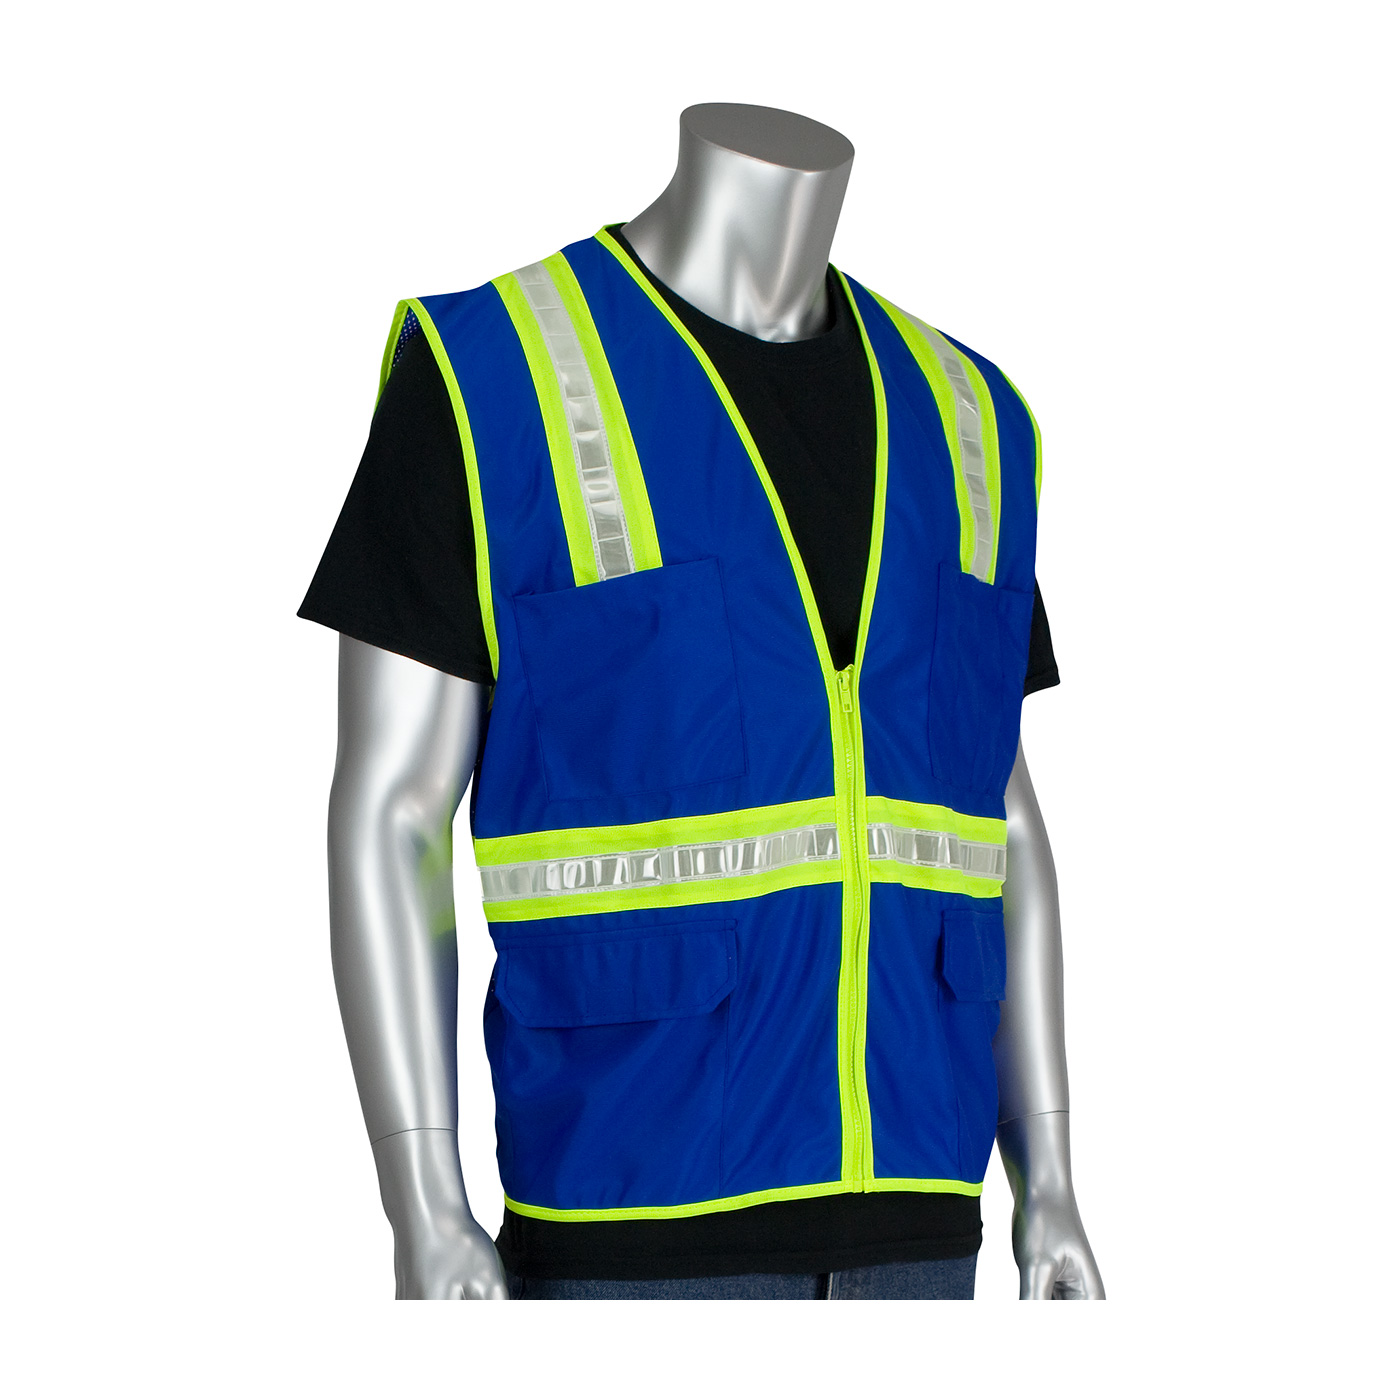 PIP 300-1000-BL/XL Non-ANSI Surveyor's Style Safety Vest with a Solid Front, Mesh Back and Prismatic Tape - X-Large PID-300 1000 BL XL